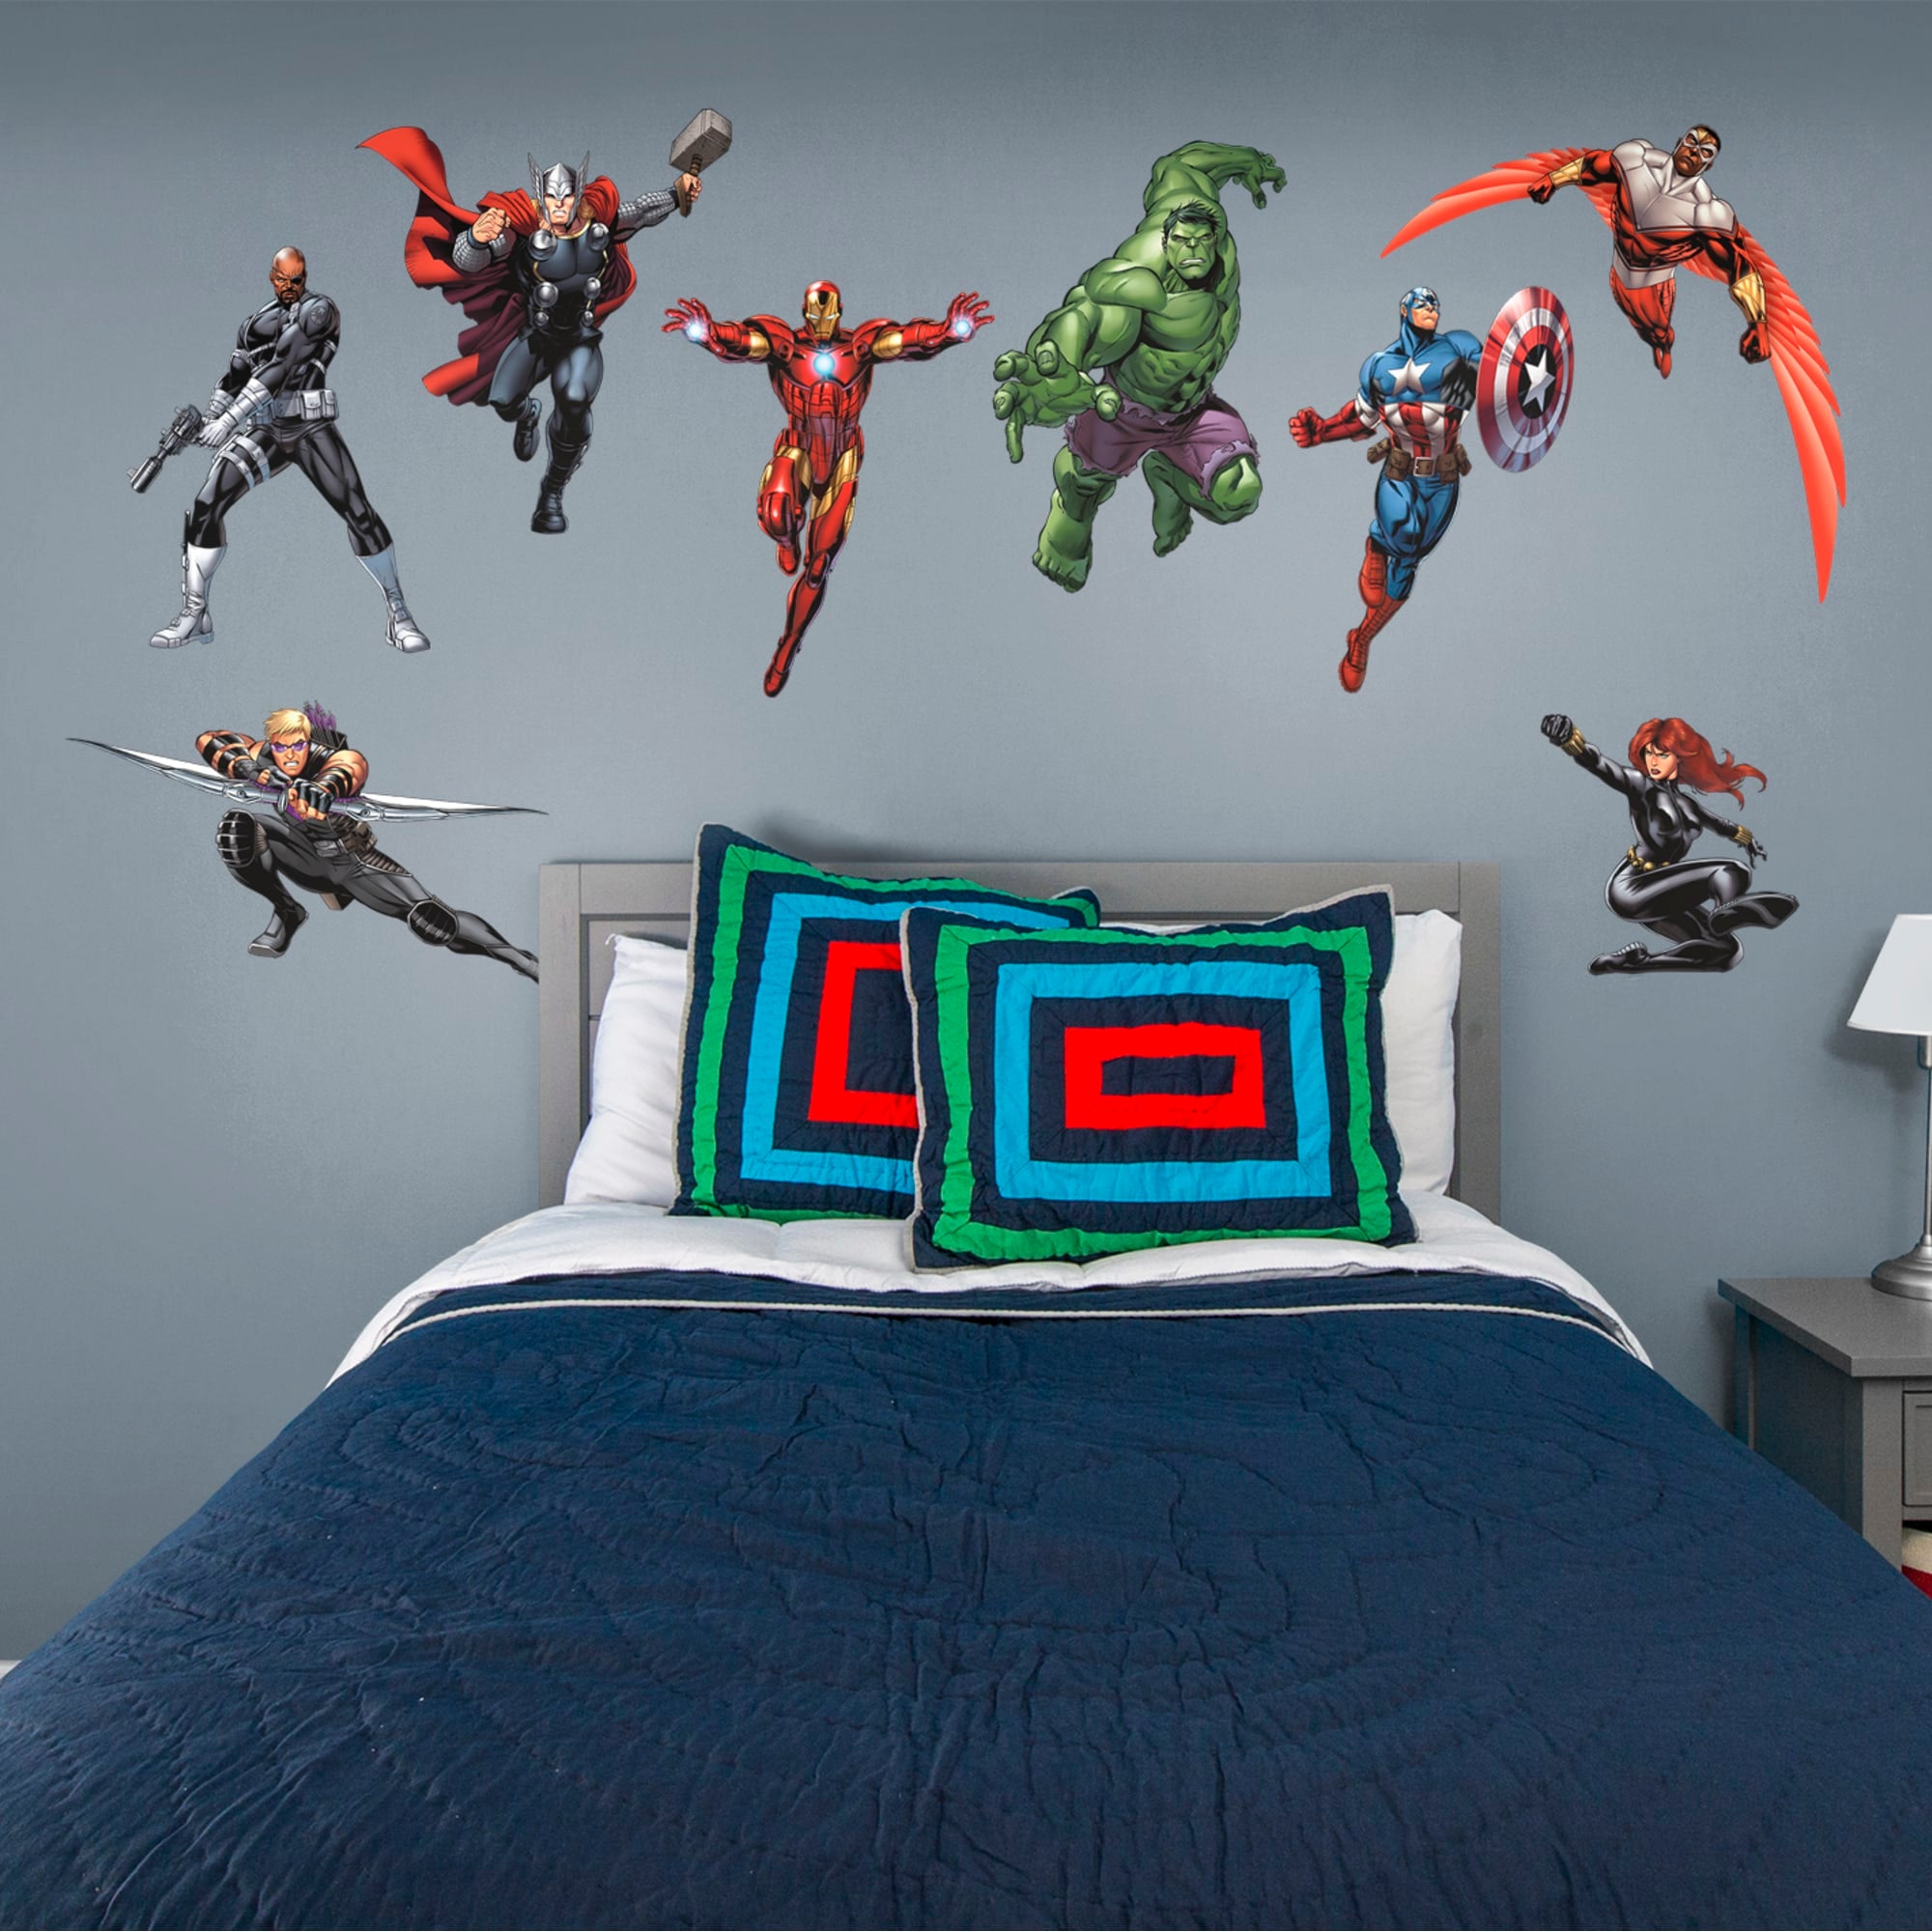 Marvels Avengers Assemble: Collection - Officially Licensed Removable Wall Decal 79.0"W x 52.0"H by Fathead | Vinyl